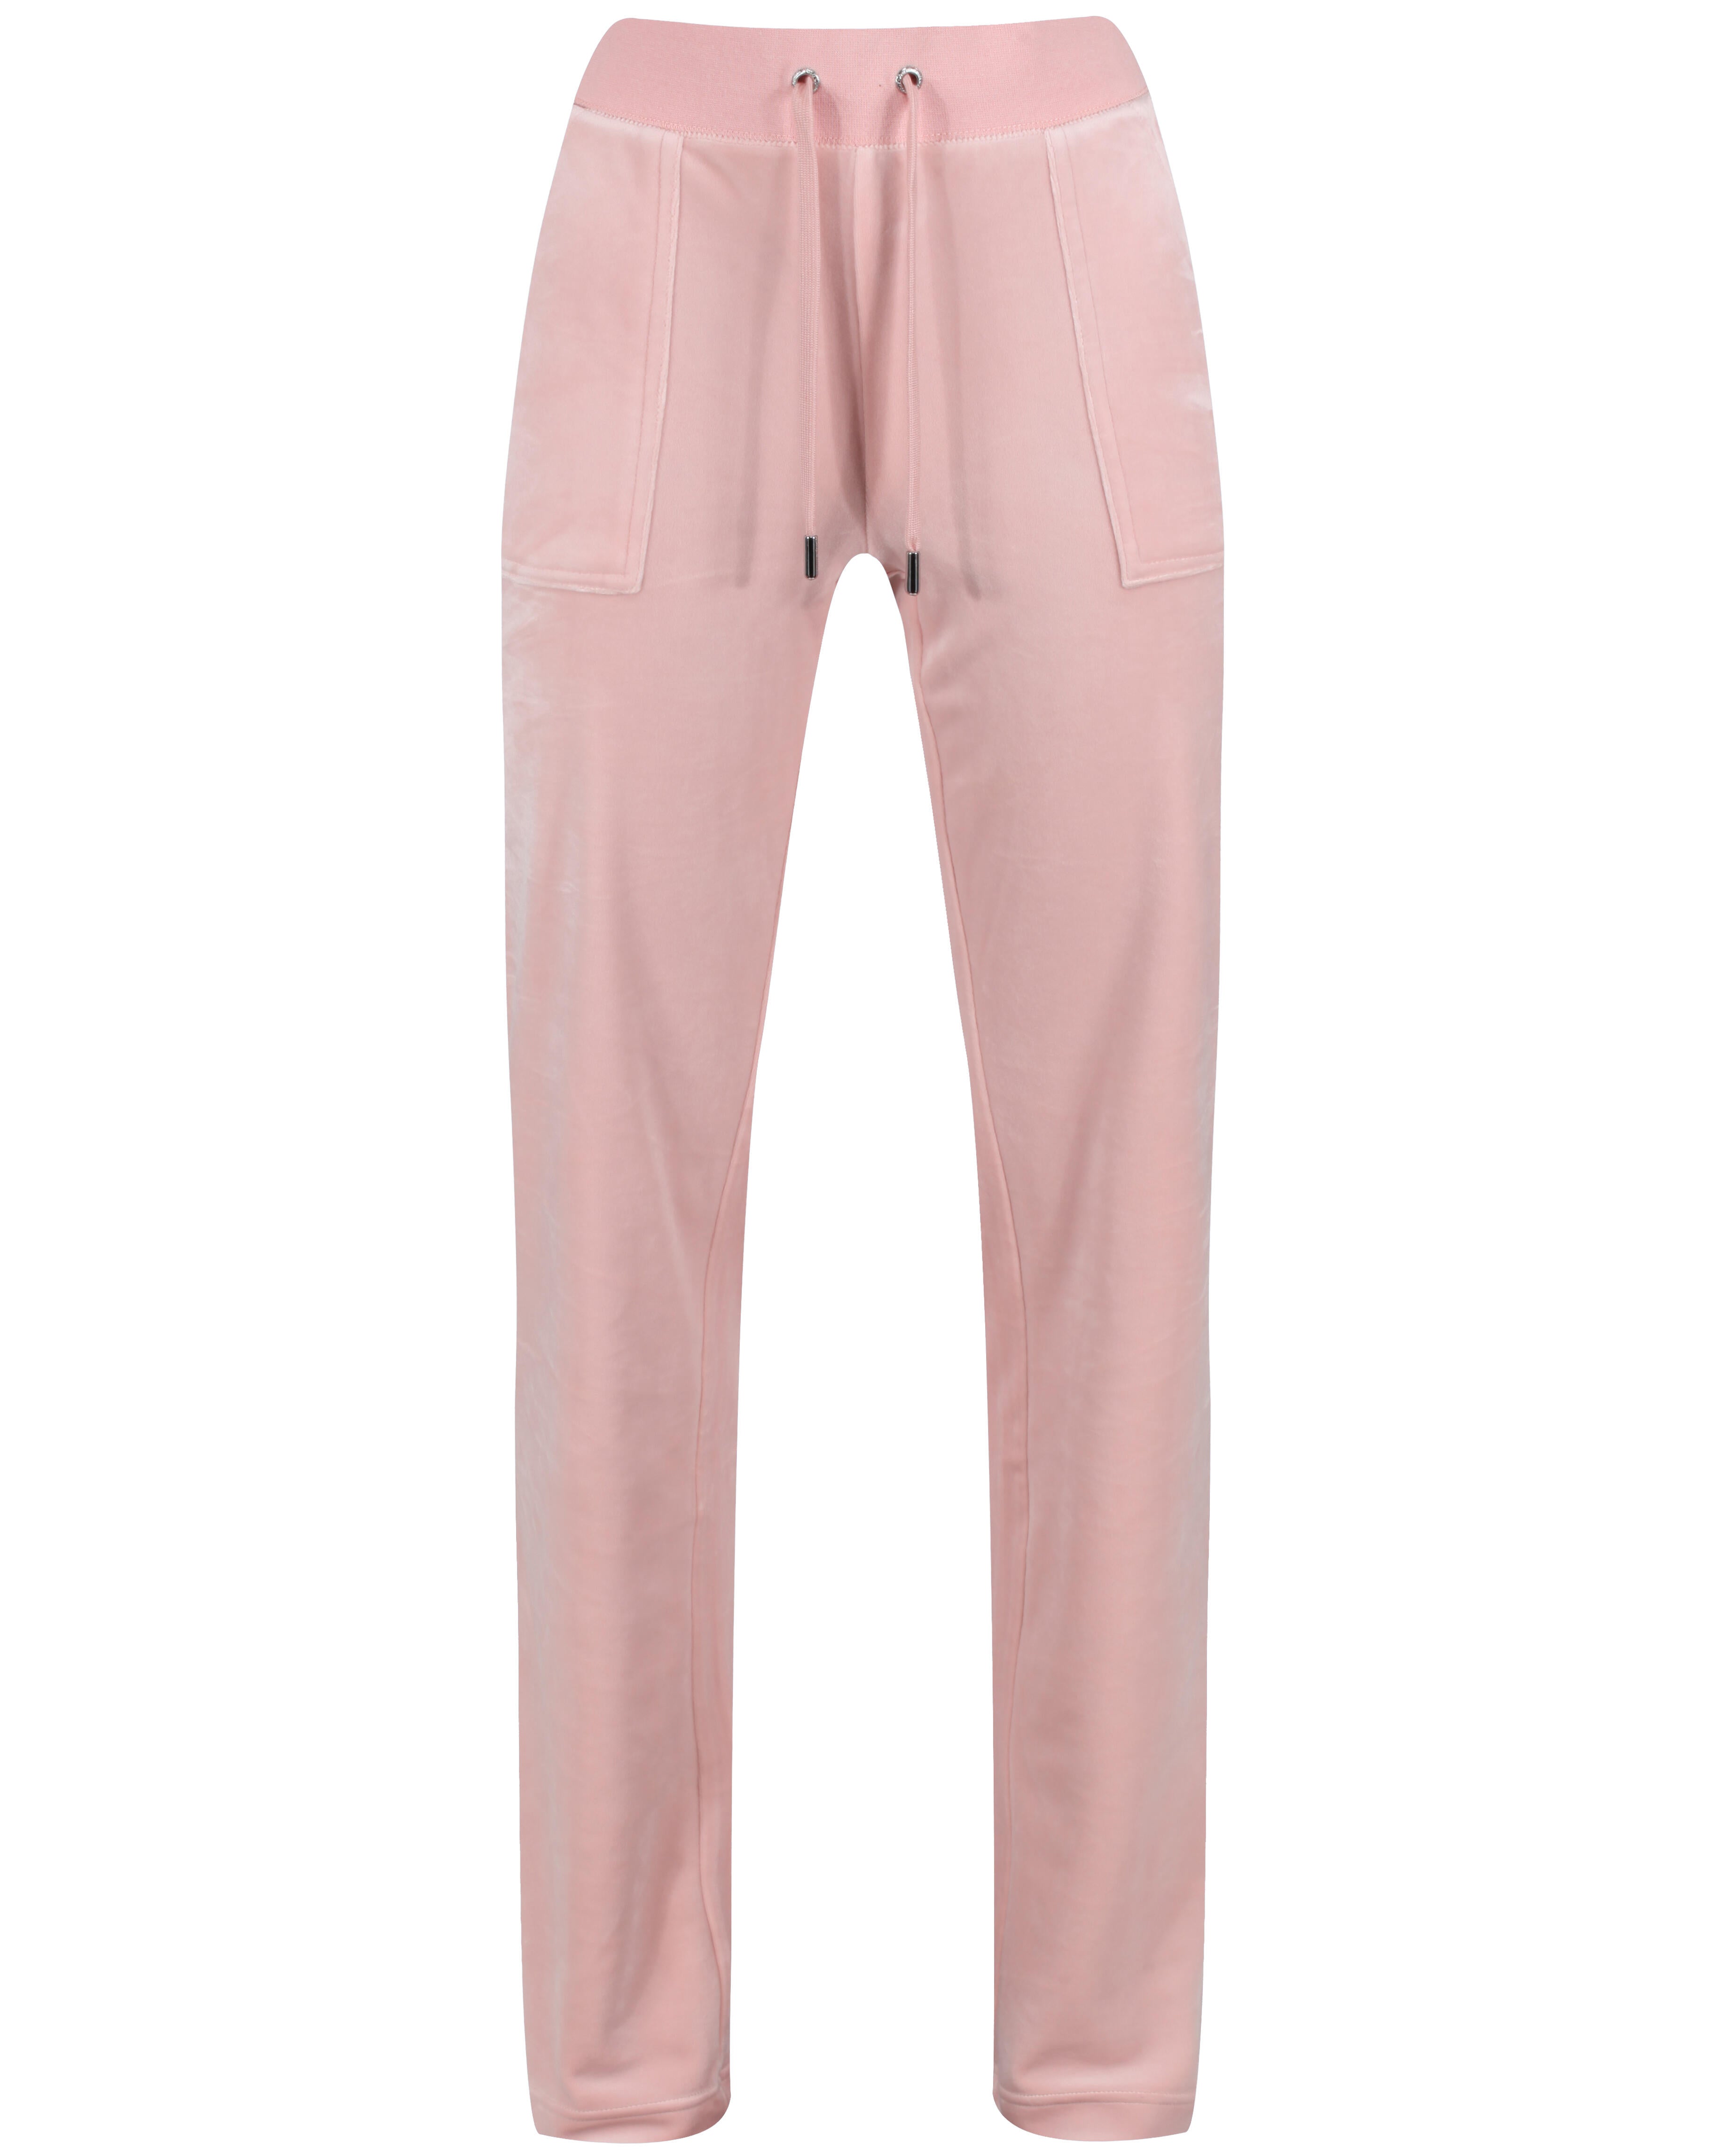 Del Ray Classic Velour Pant Pocket - Pale Pink